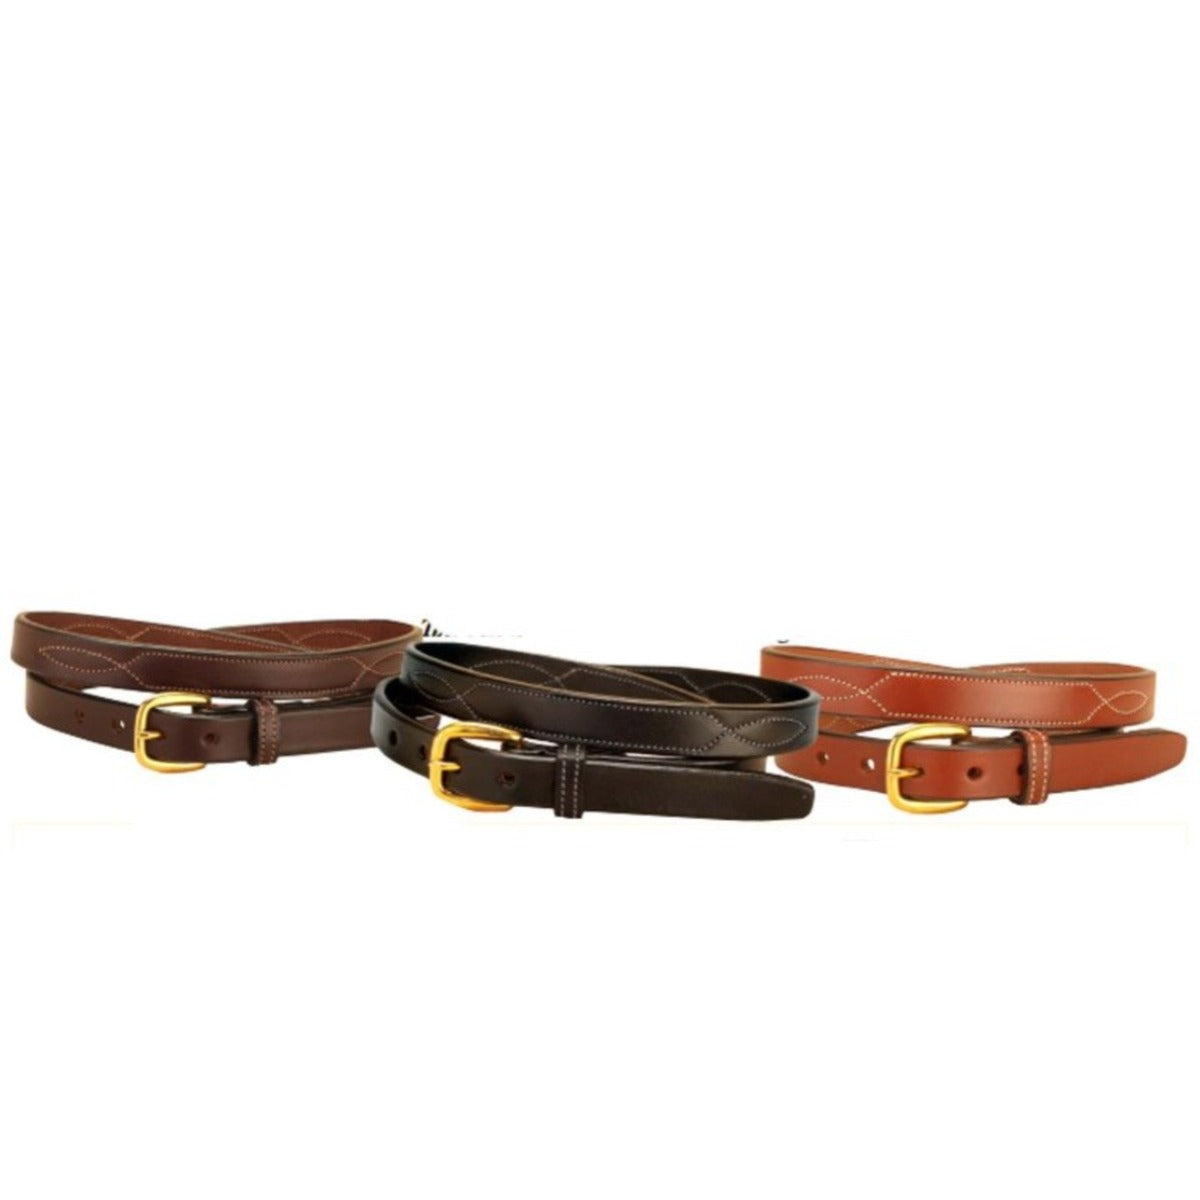 Tory Leather braided leather belt